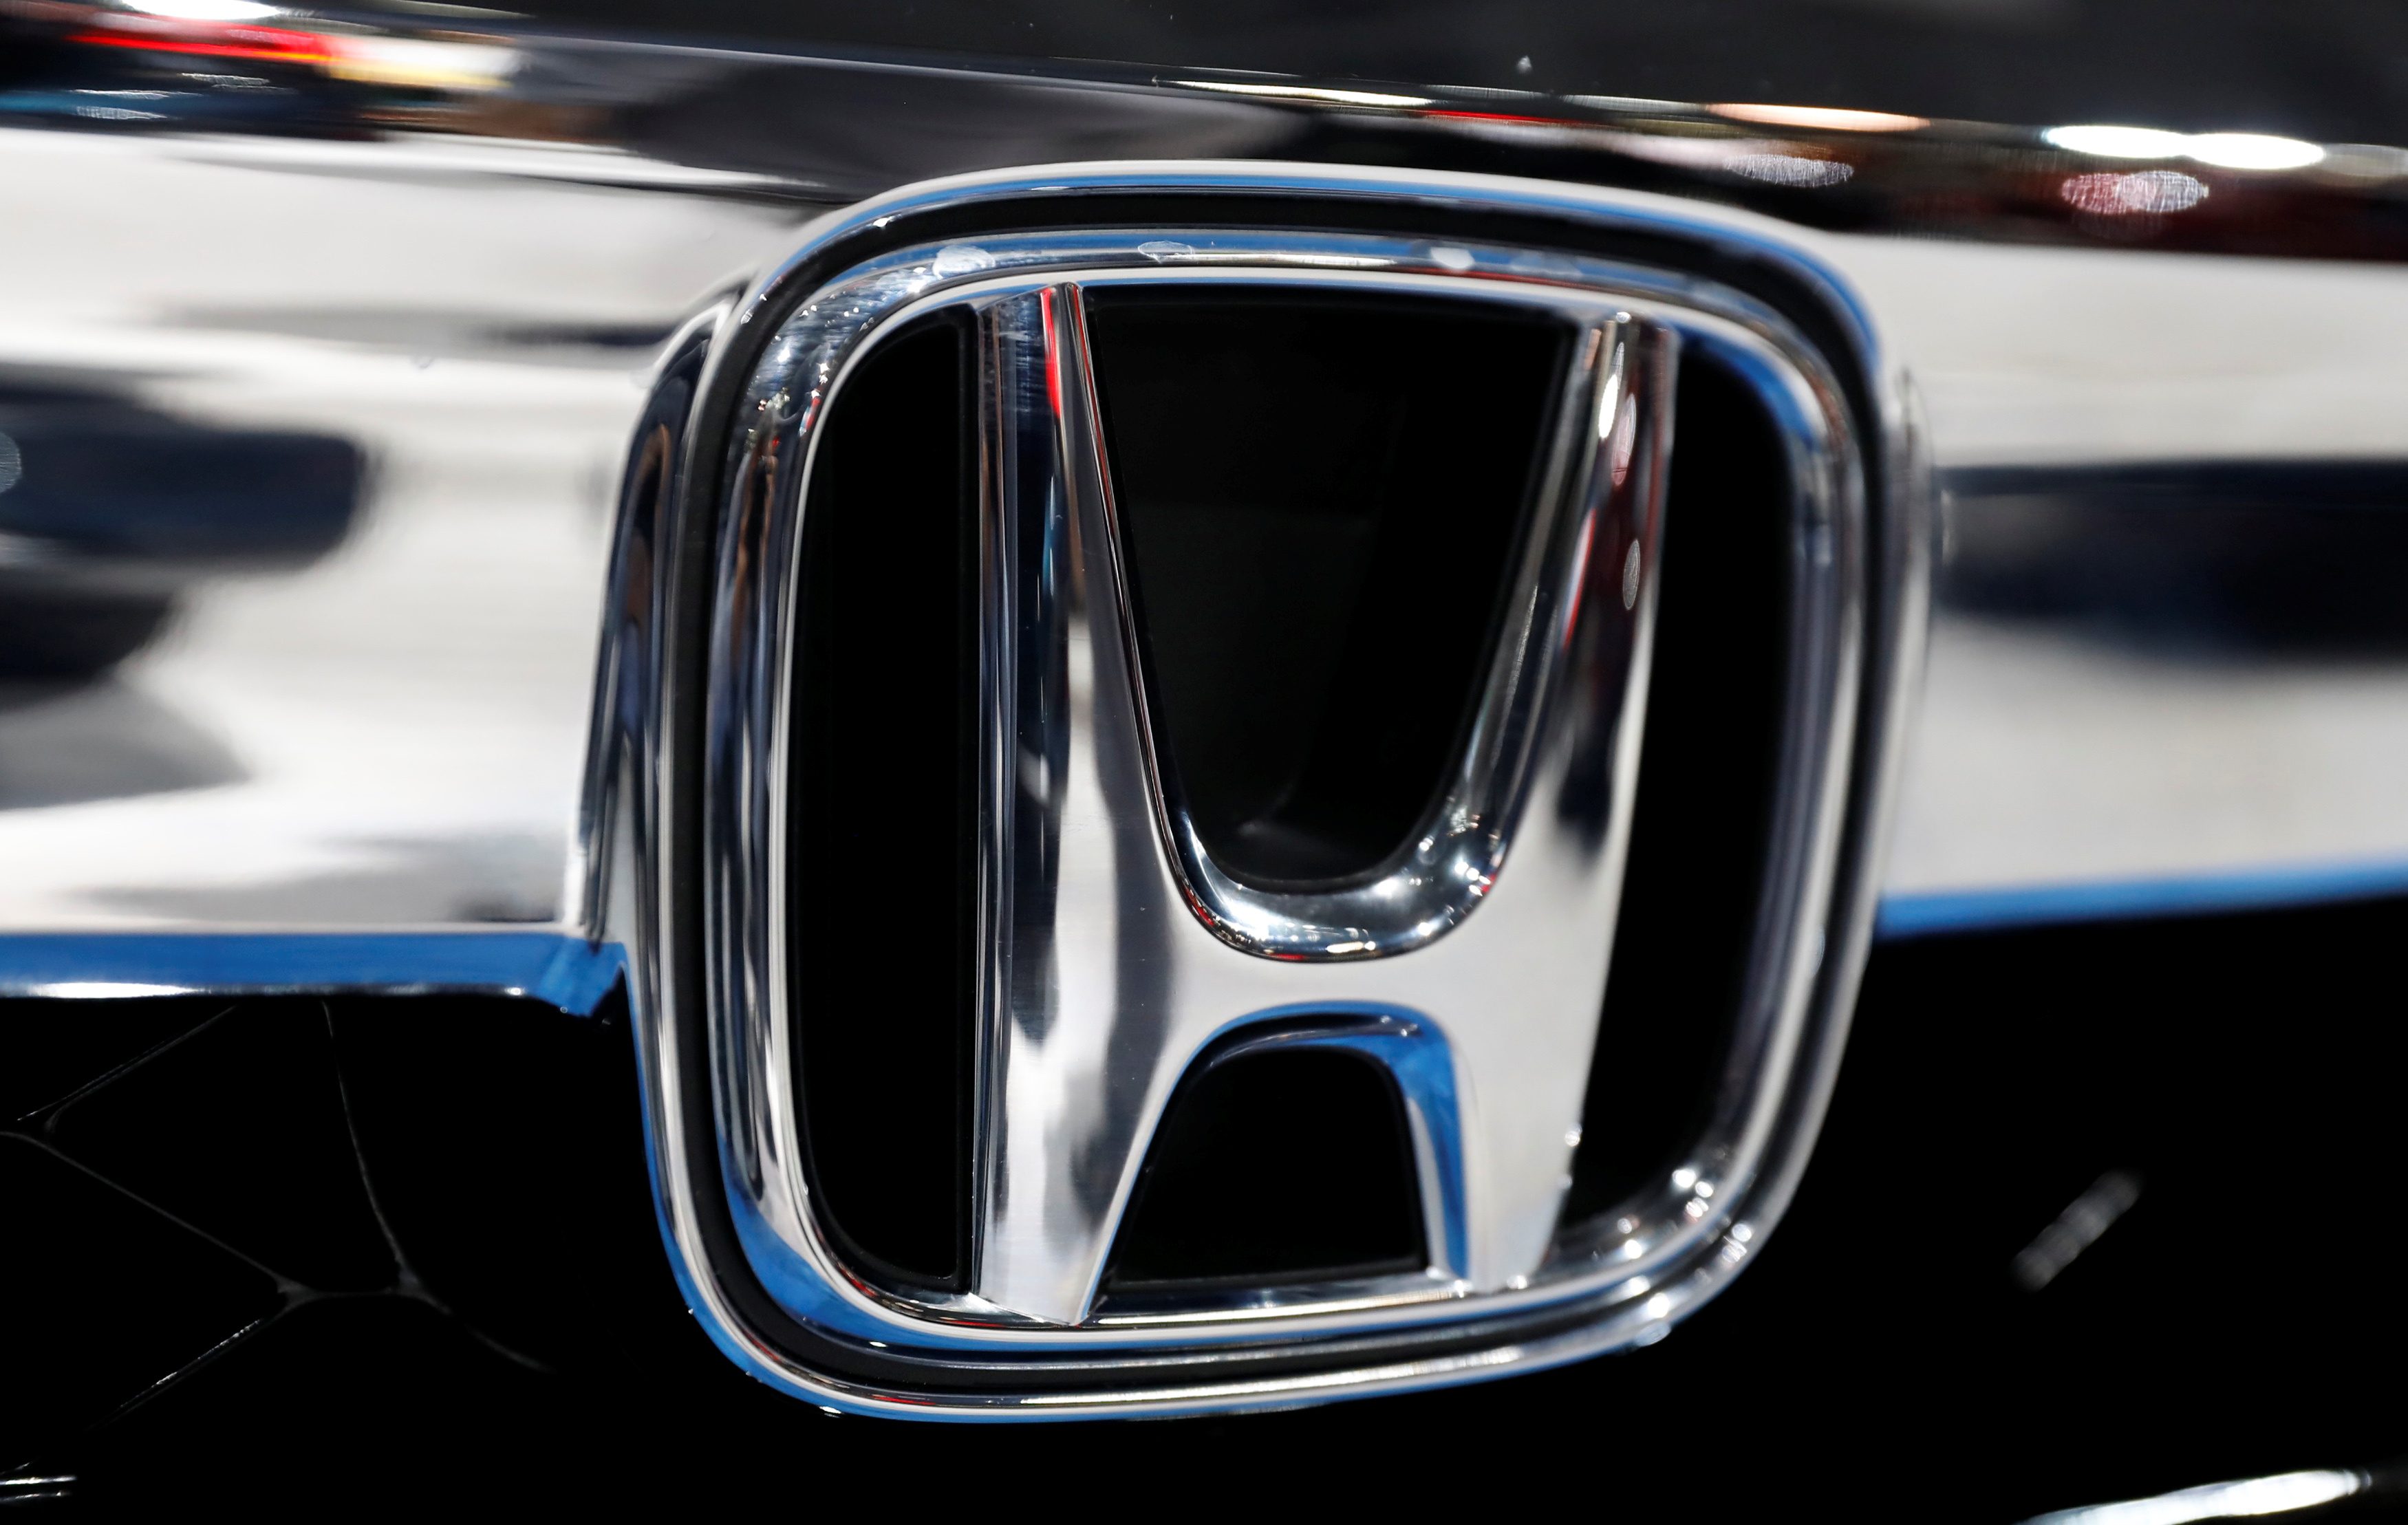 Honda, Nissan to sell 250,000 fewer cars because of chip shortage